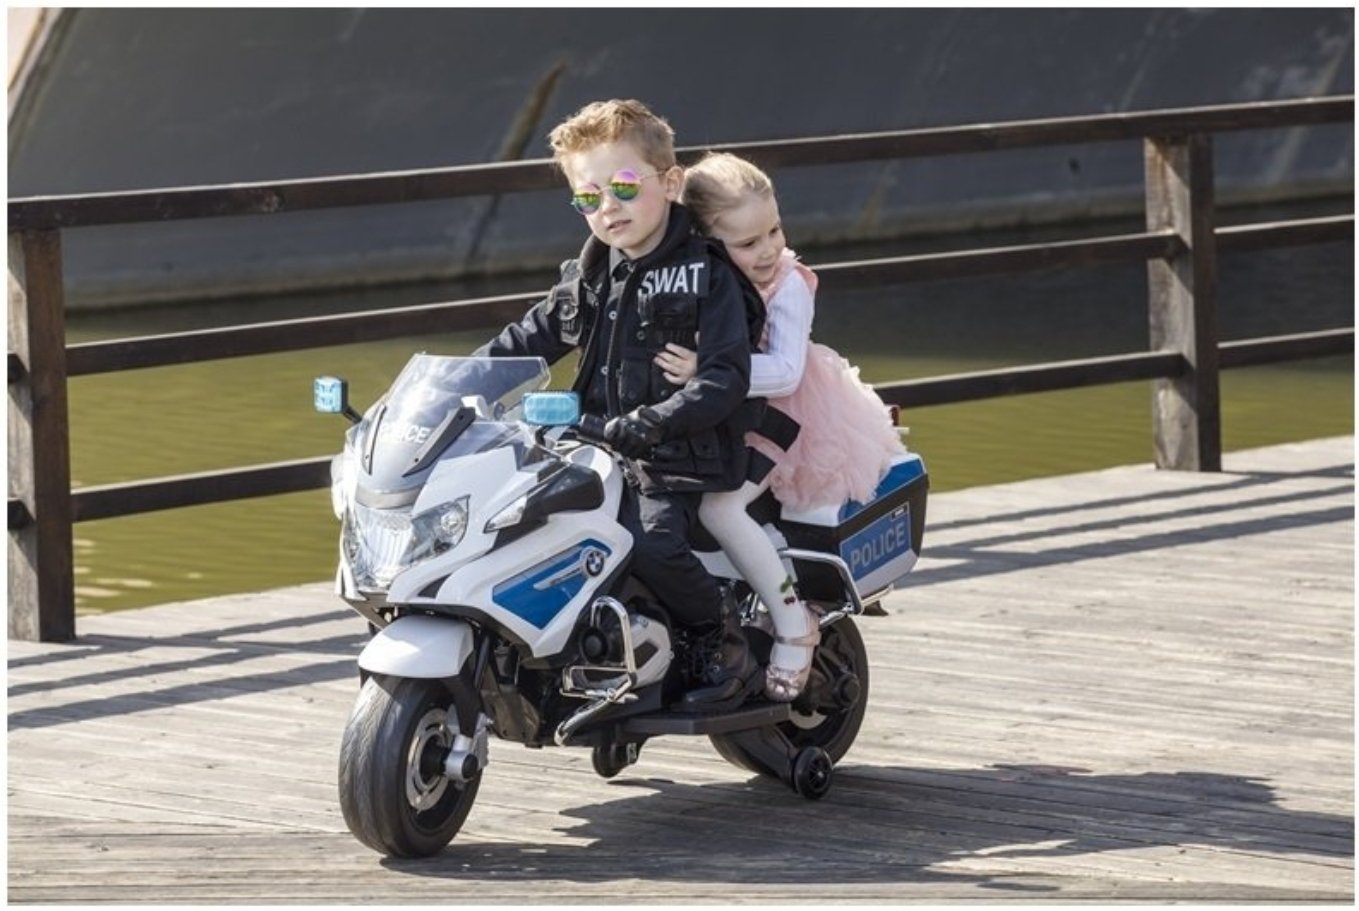 Two children play-acting as police officers on silver BMW electric ride on motorbike, wearing sunglasses